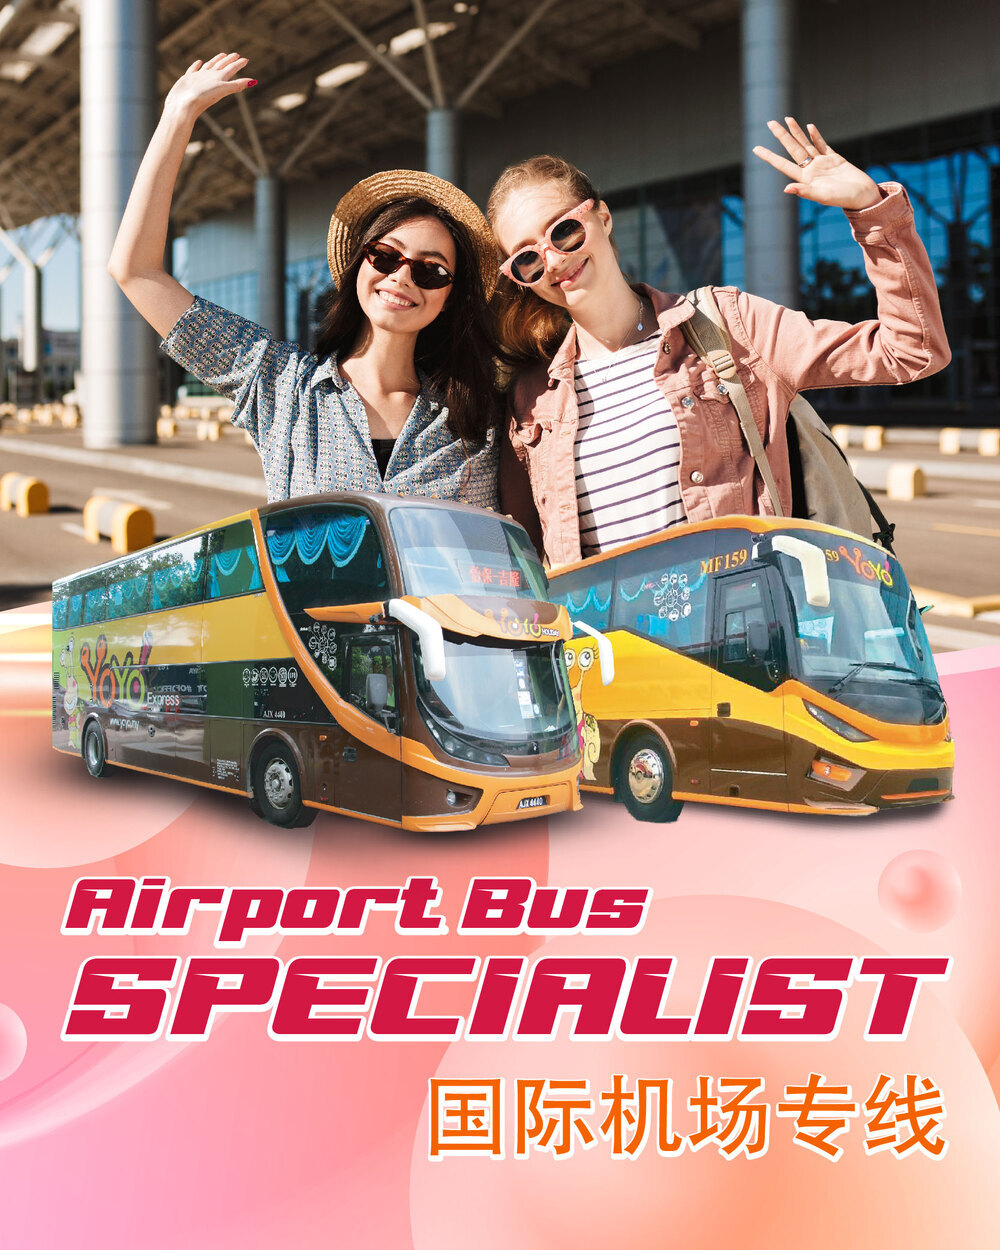 Airport Bus Online Ticket booking platform in Malaysia. Provide professional, reliable shuttle bus services.